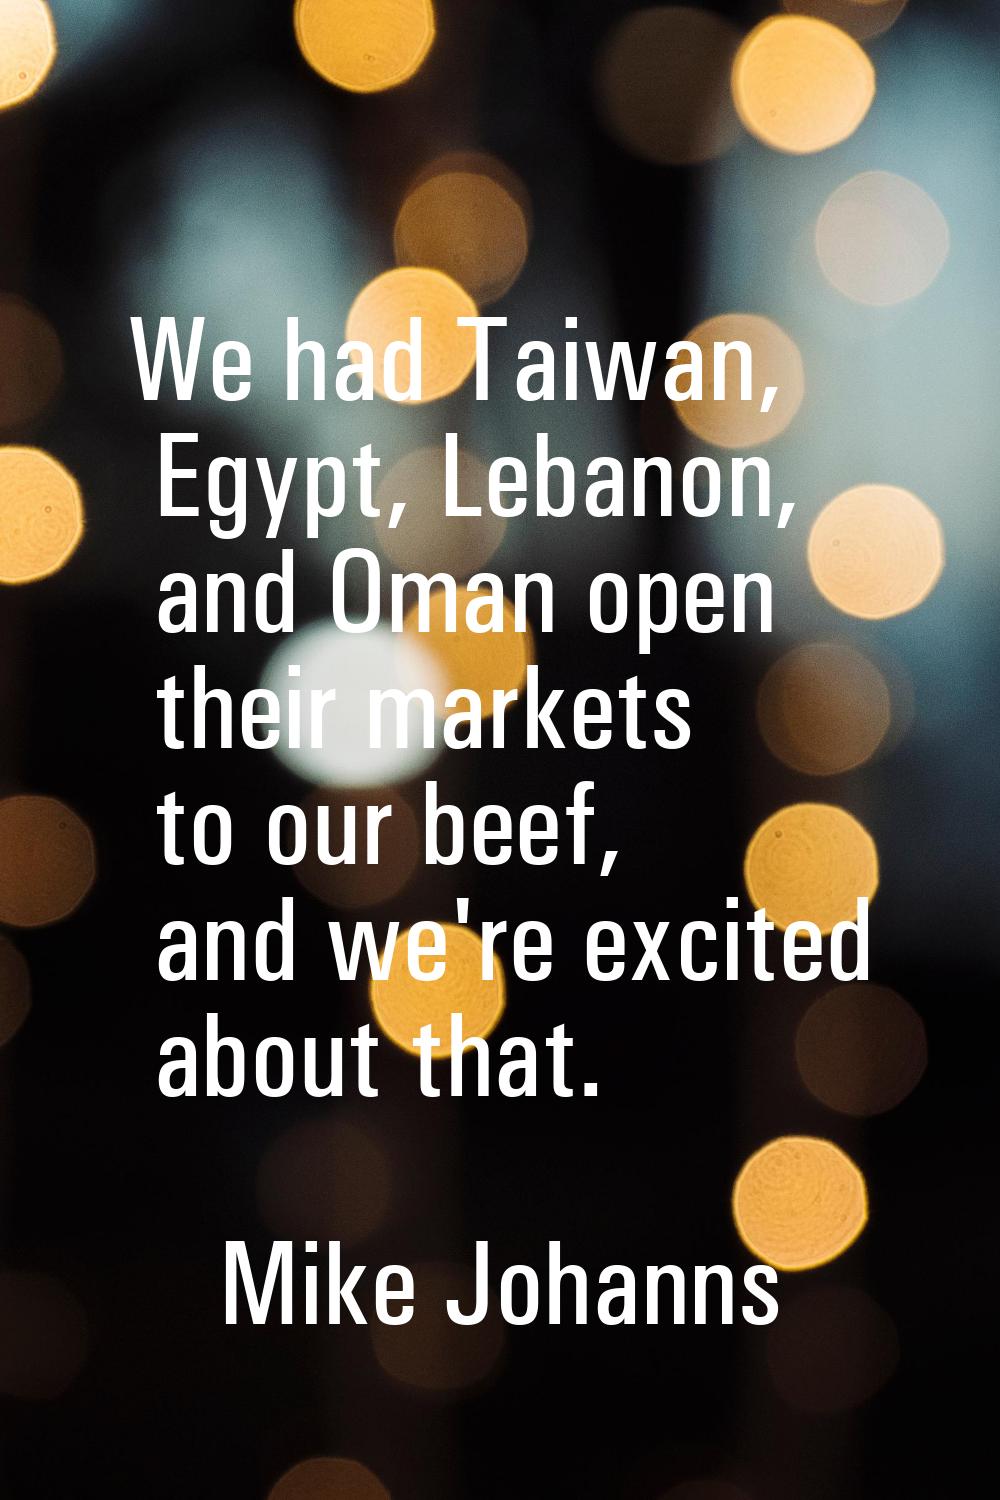 We had Taiwan, Egypt, Lebanon, and Oman open their markets to our beef, and we're excited about tha